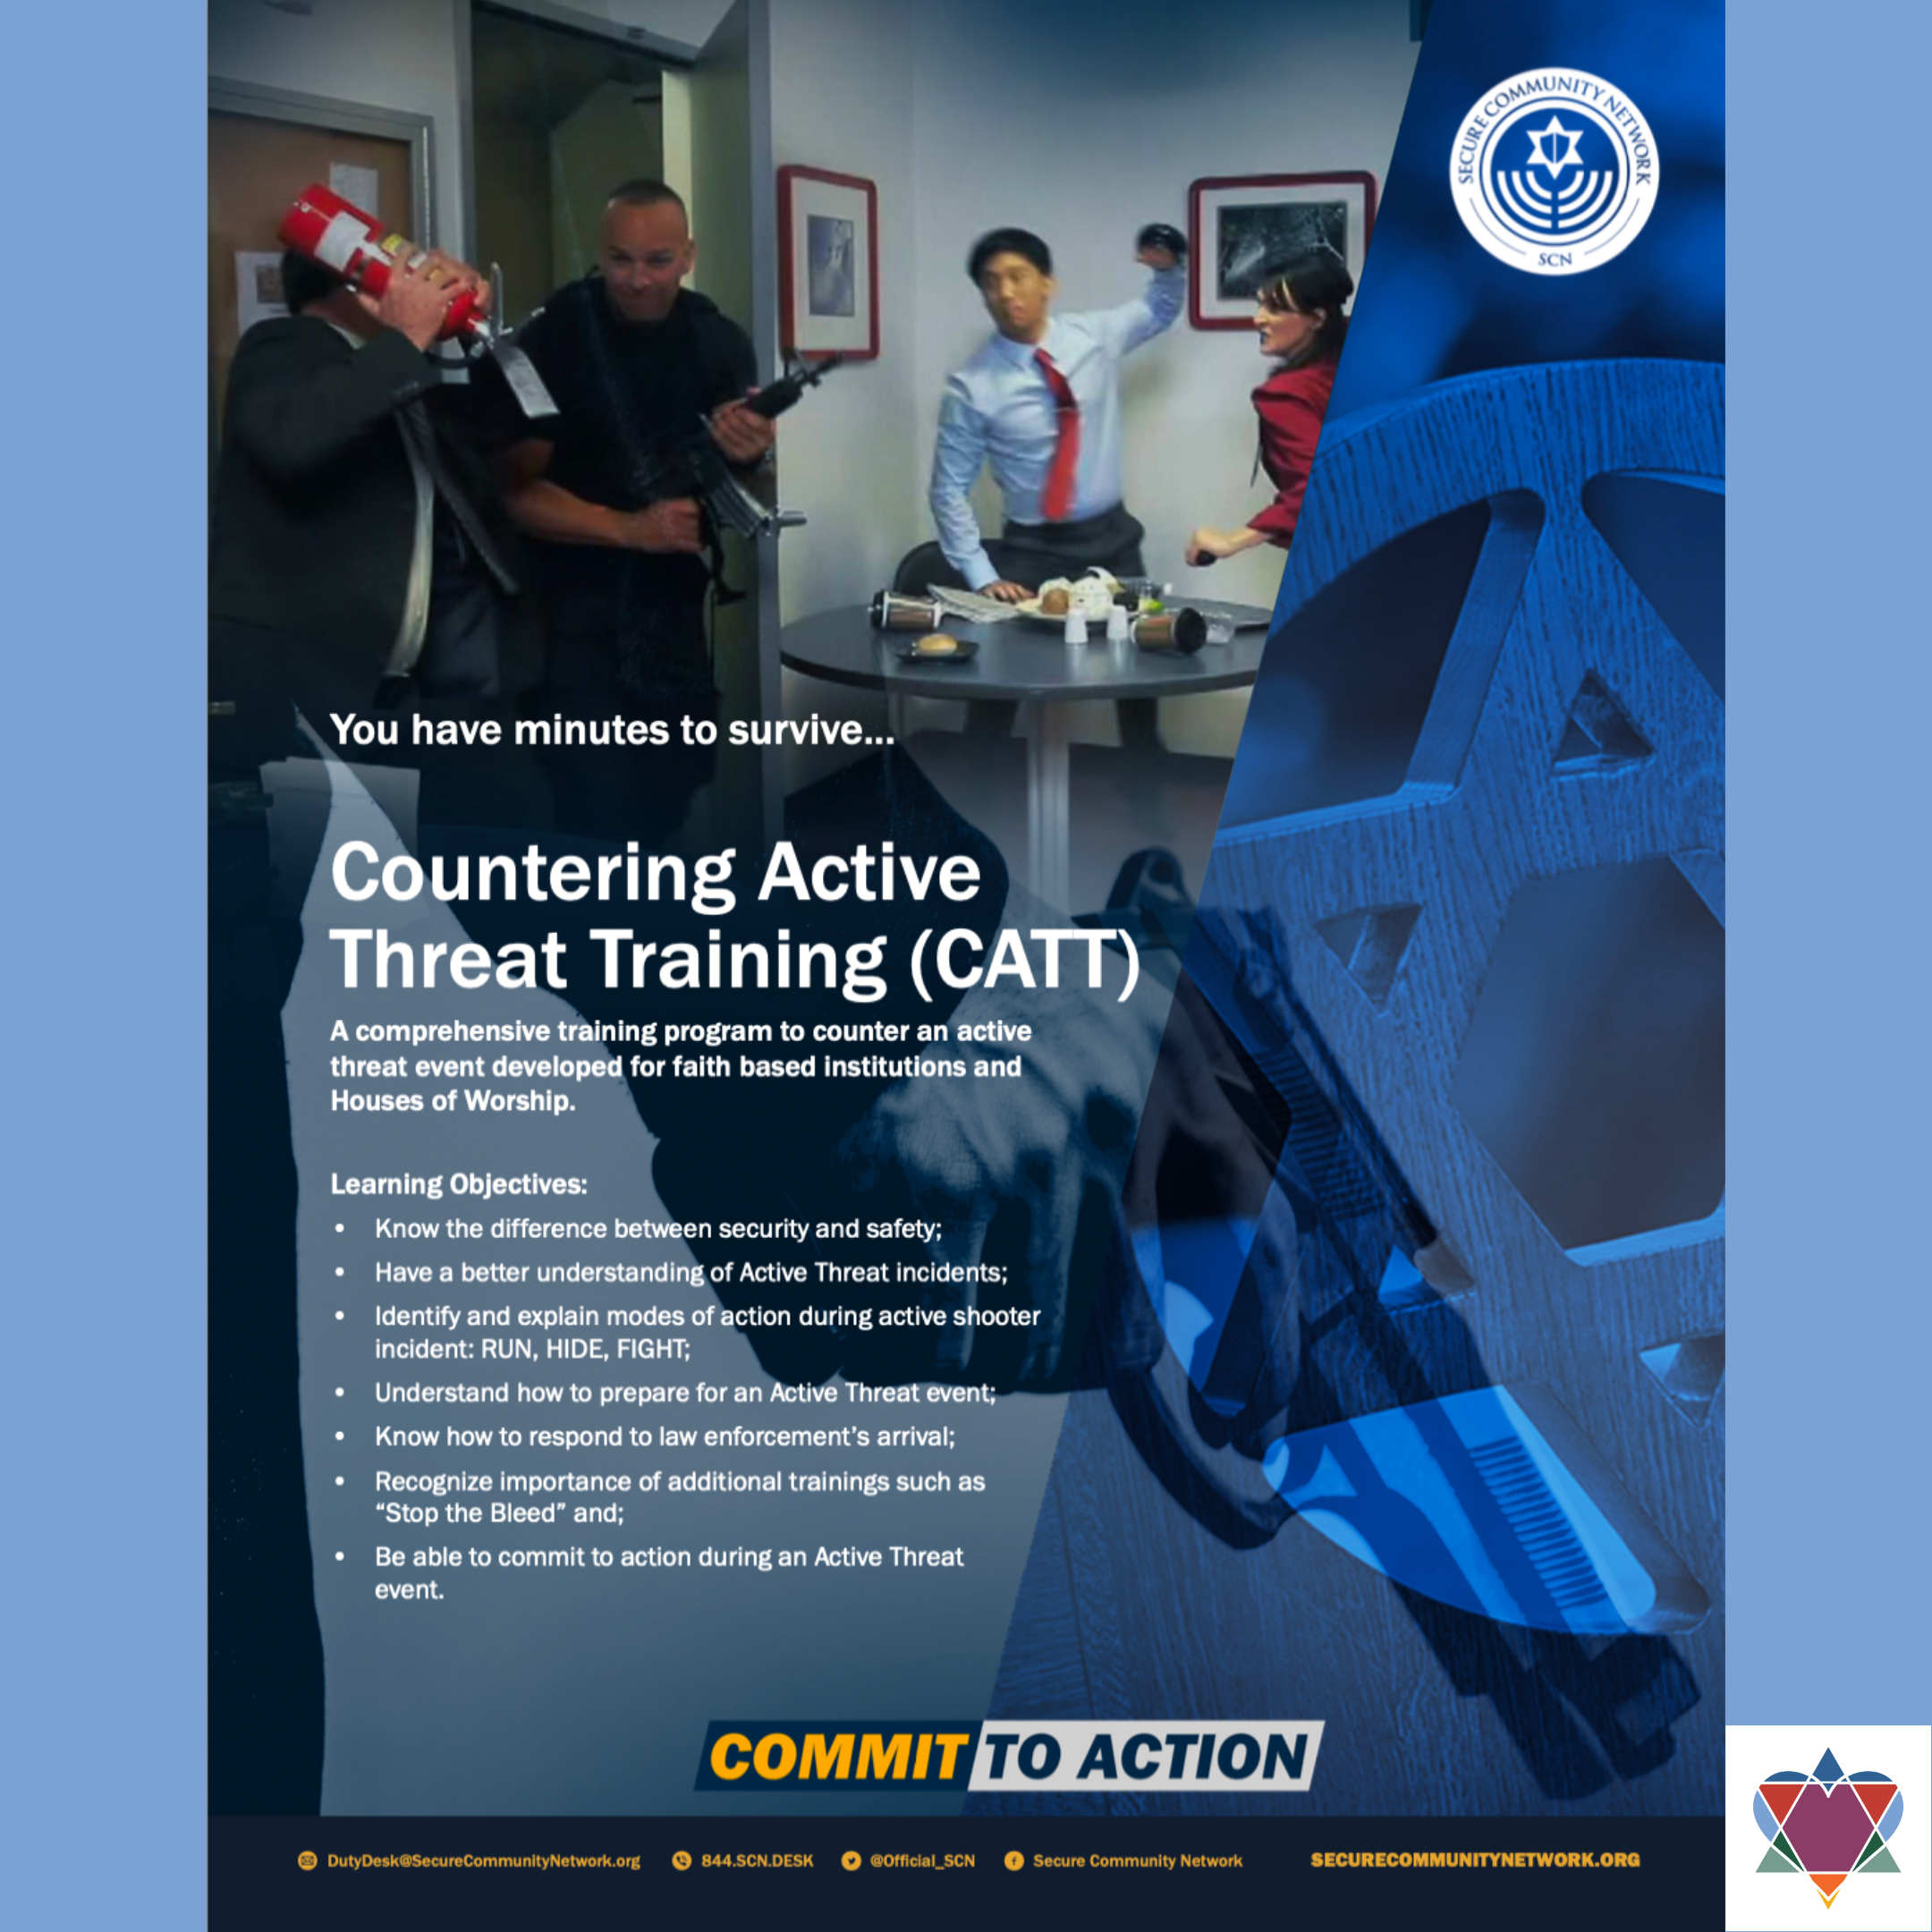 COUNTERING ACTIVE THREAT TRAINING - REGISTER HERE